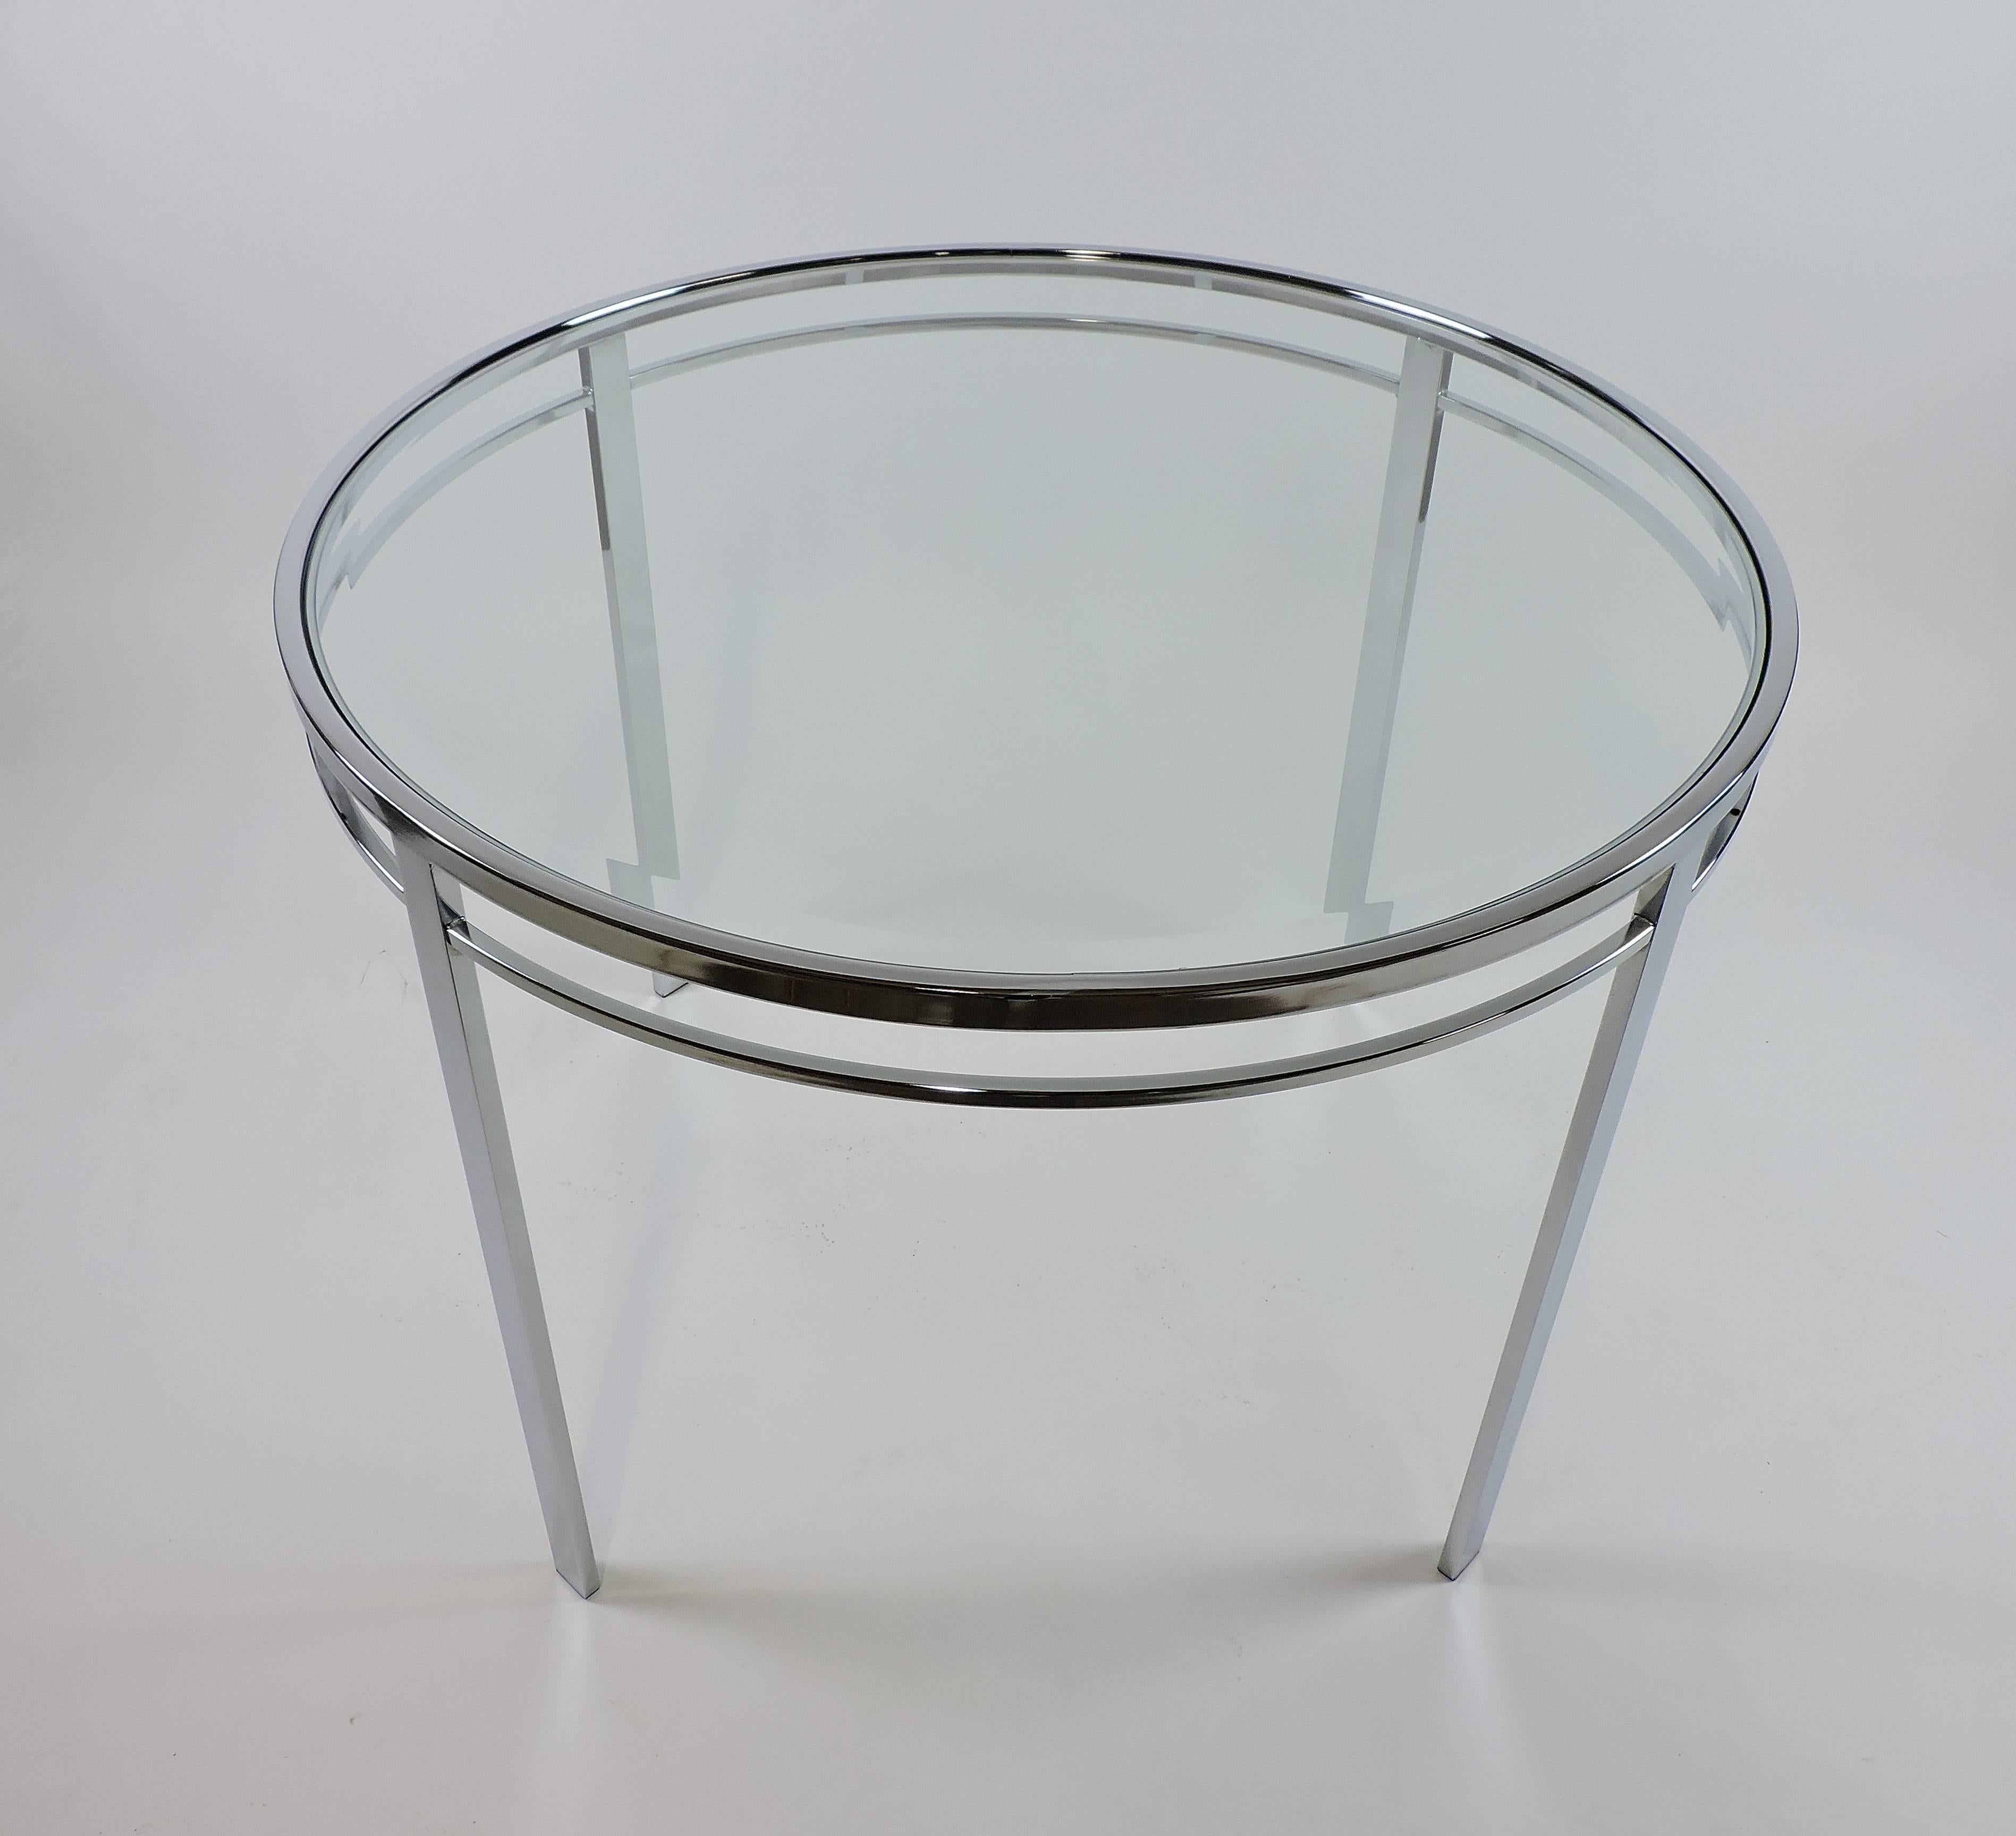 Beautiful round dining or kitchen table made of chrome with a glass top with a beveled edge. It has clean and simple lines and is perfect for small spaces or in a kitchen.
  